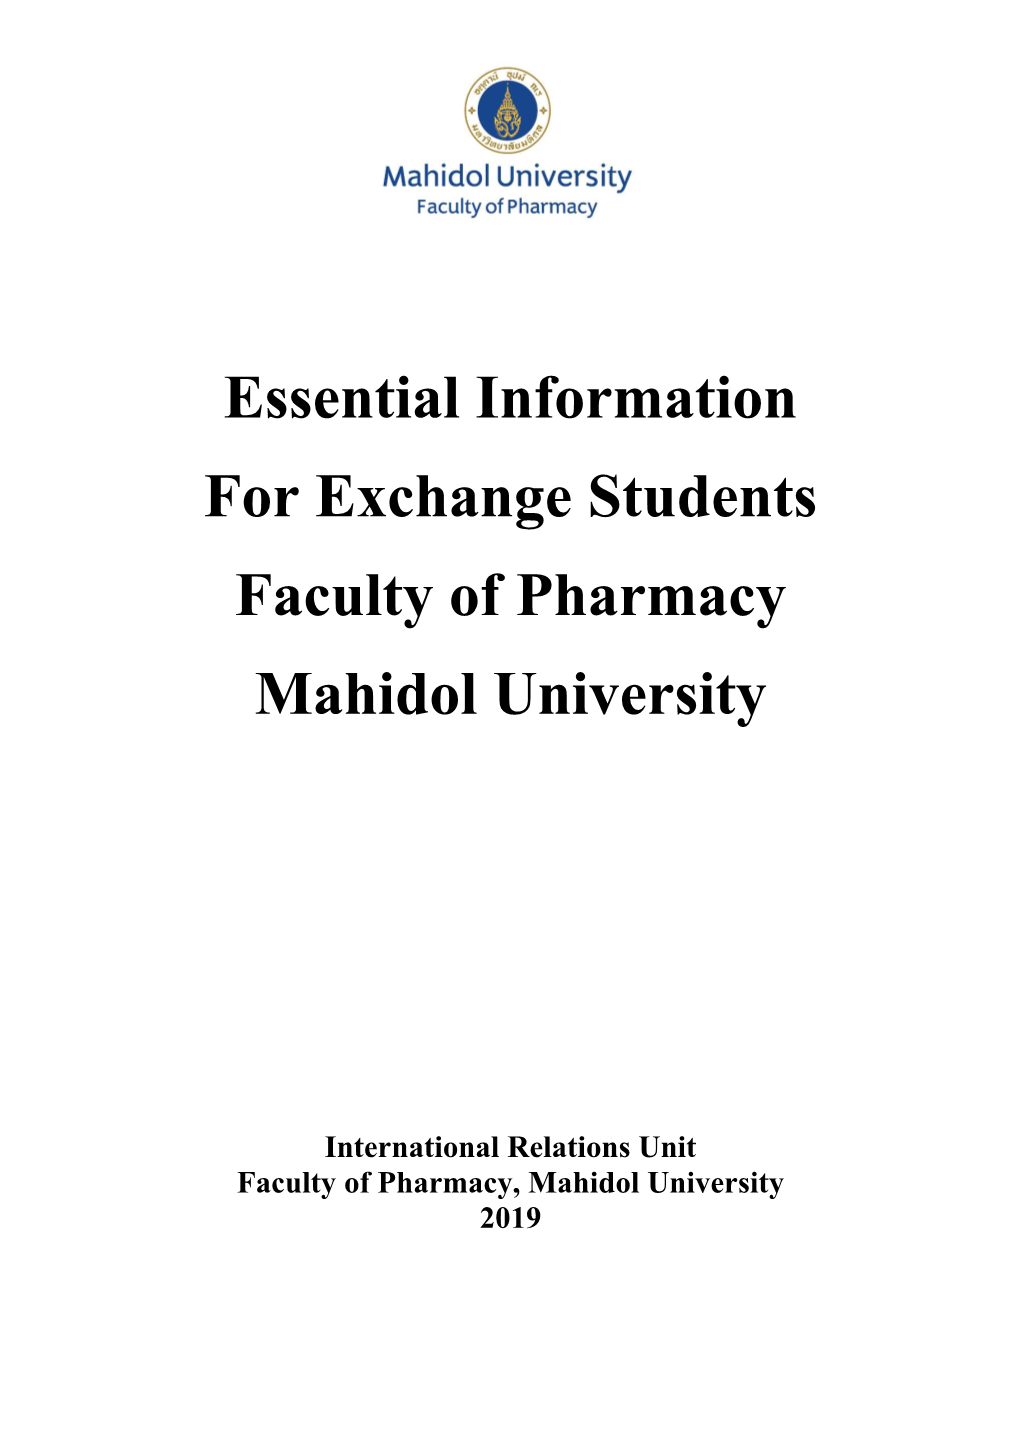 Essential Information for Exchange Students Faculty of Pharmacy Mahidol University